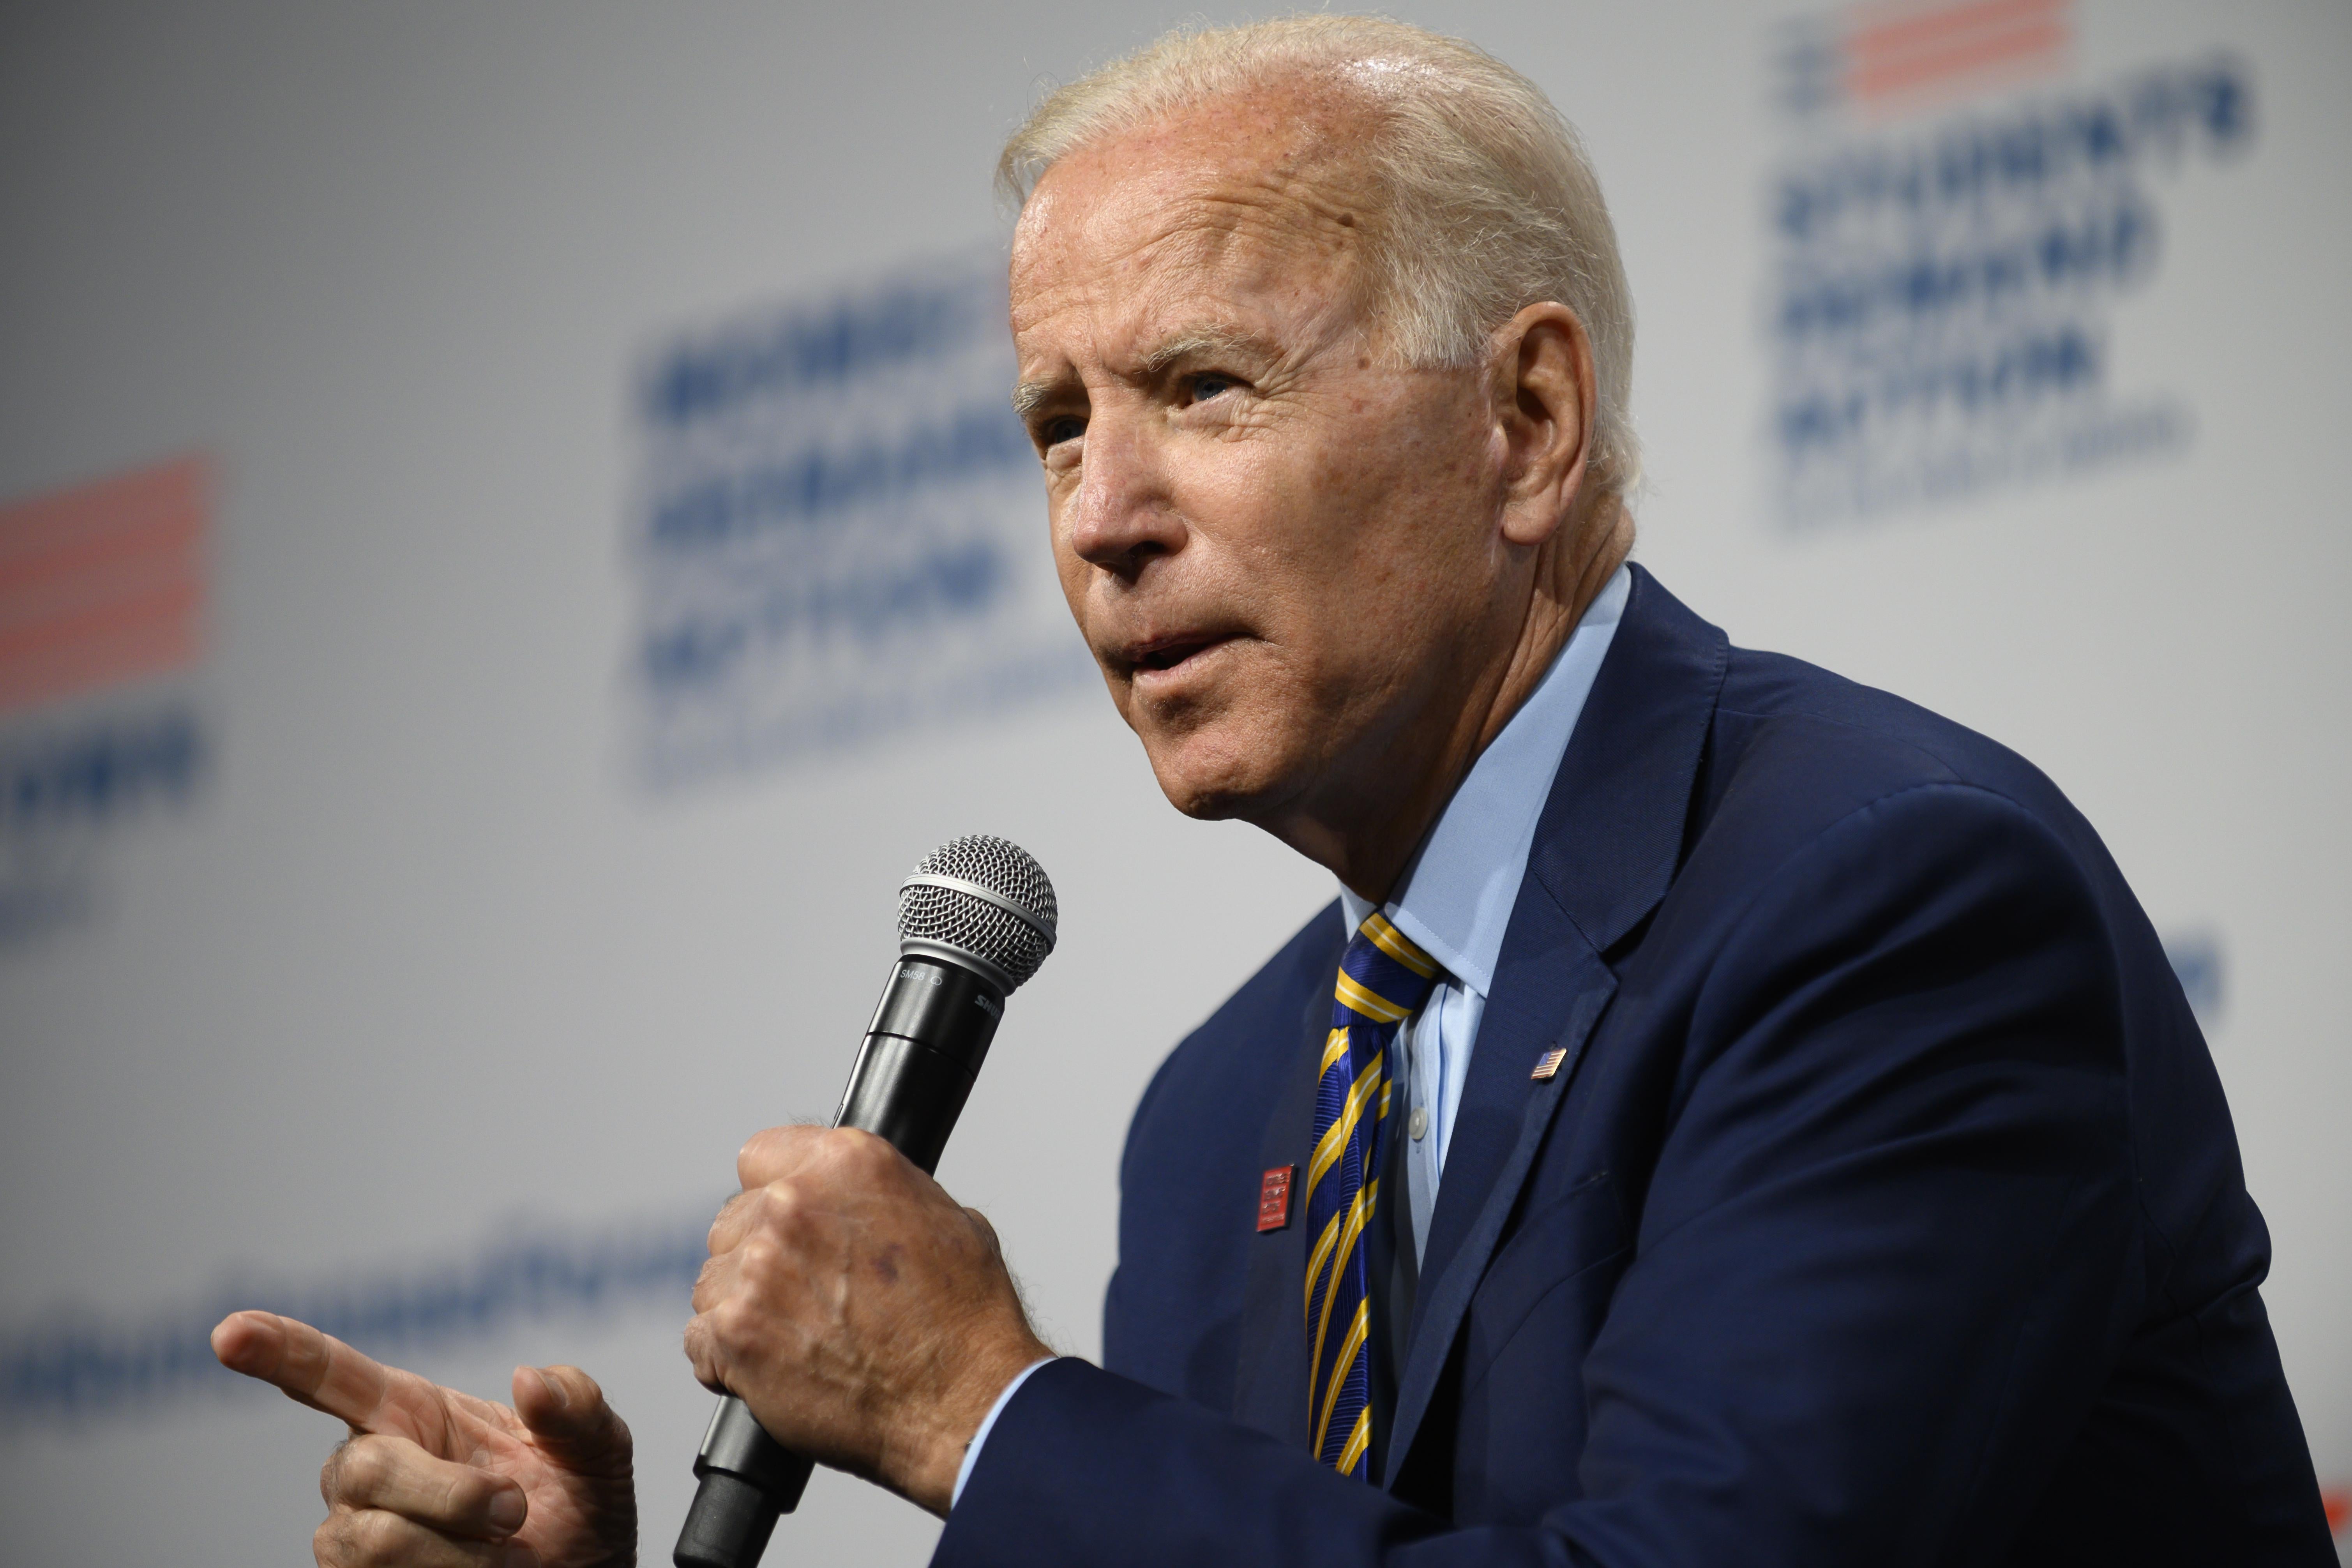 Democratic presidential candidate and former Vice President Joe Biden speaks on stage during a forum on gun safety at the Iowa Events Center on August 10, 2019 in Des Moines, Iowa. 